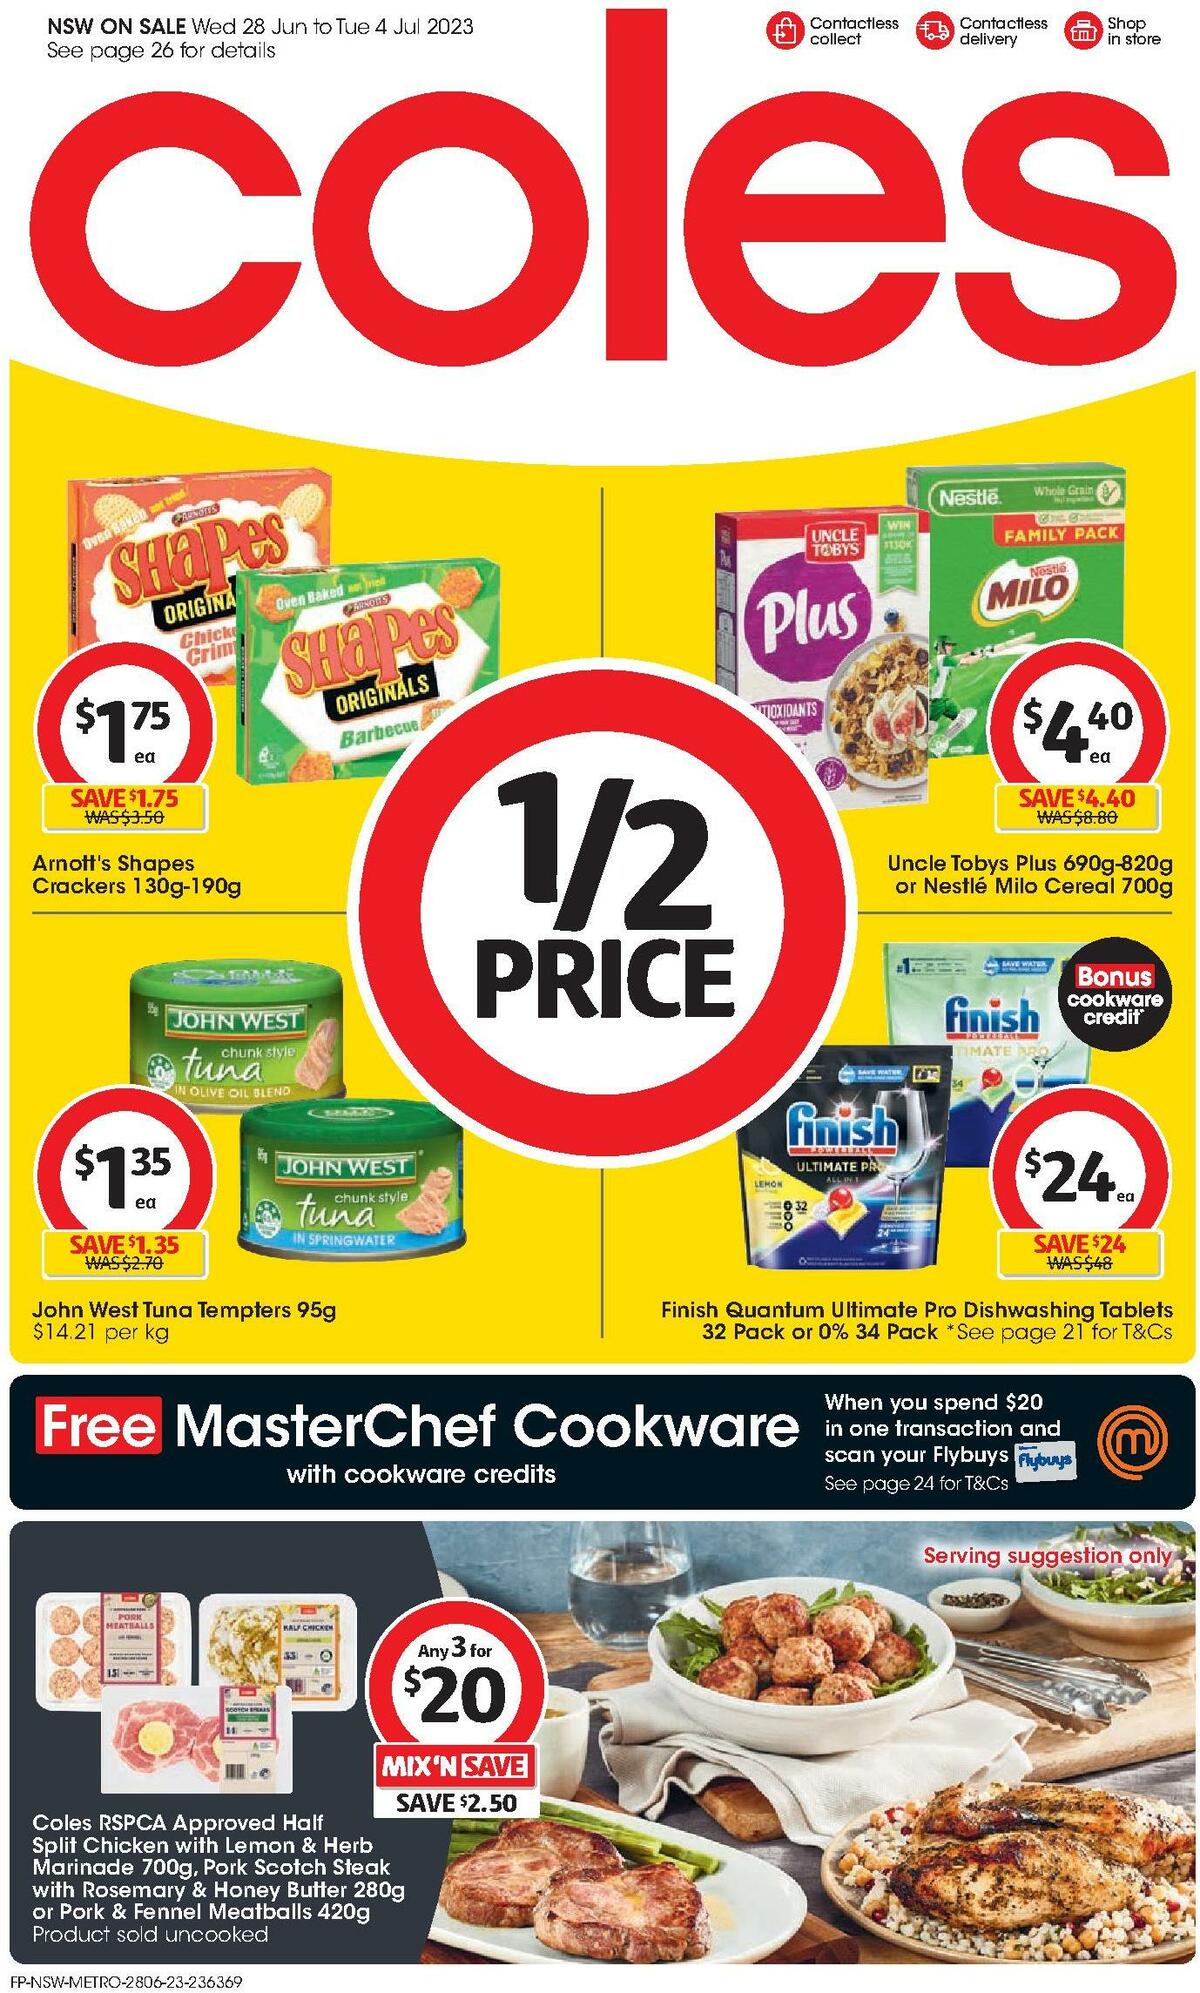 Coles Catalogues from 28 June